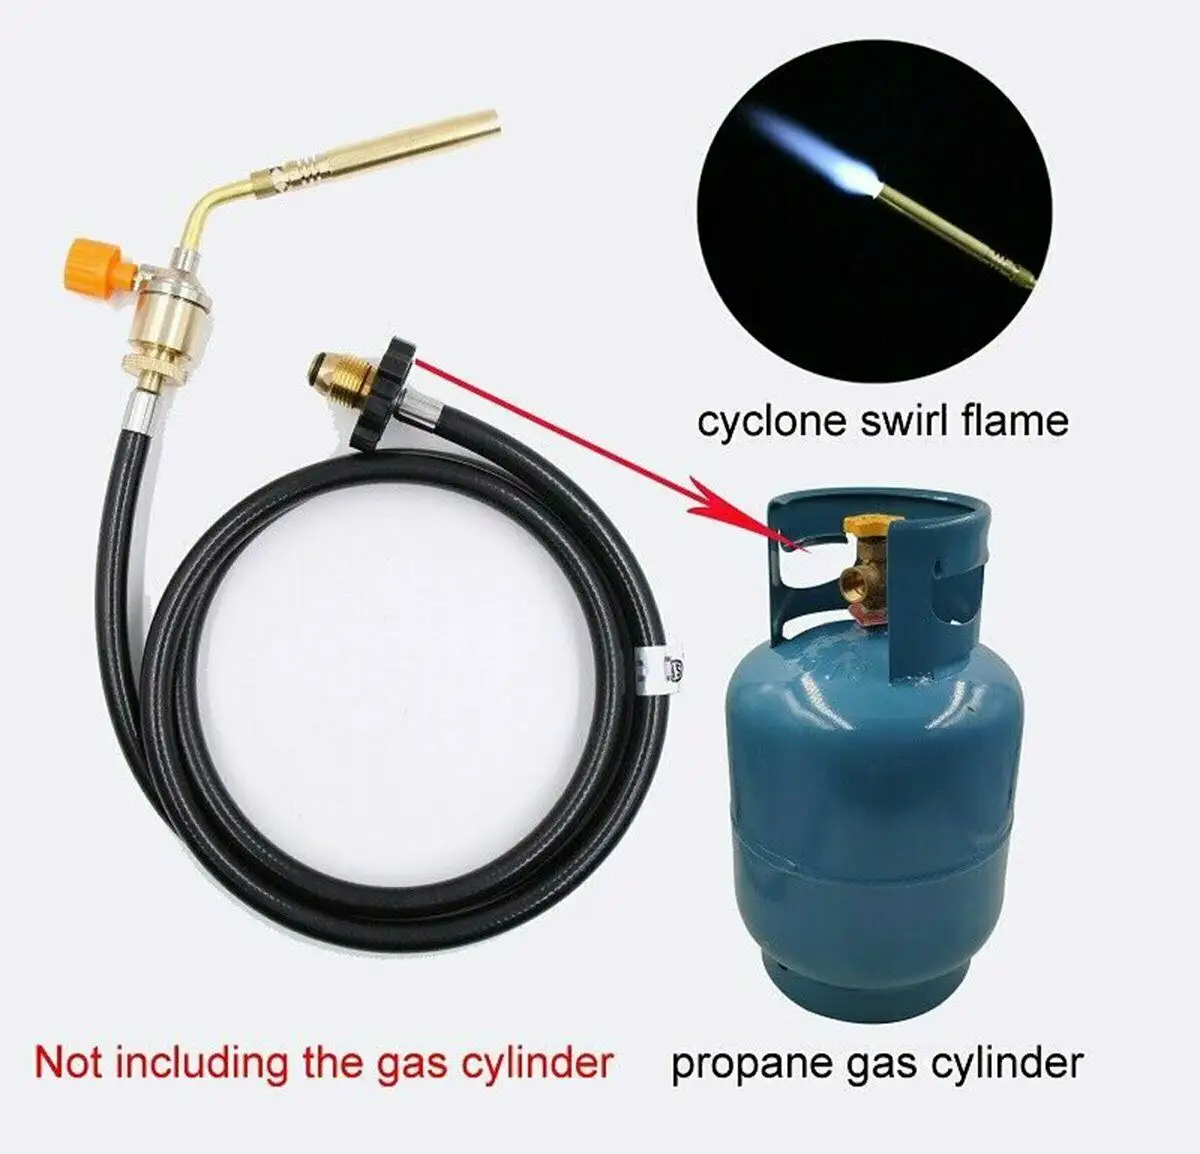 Brass MAPP / Propane Gas Cylinder Turbo Torch W/Hose For Soldering Welding